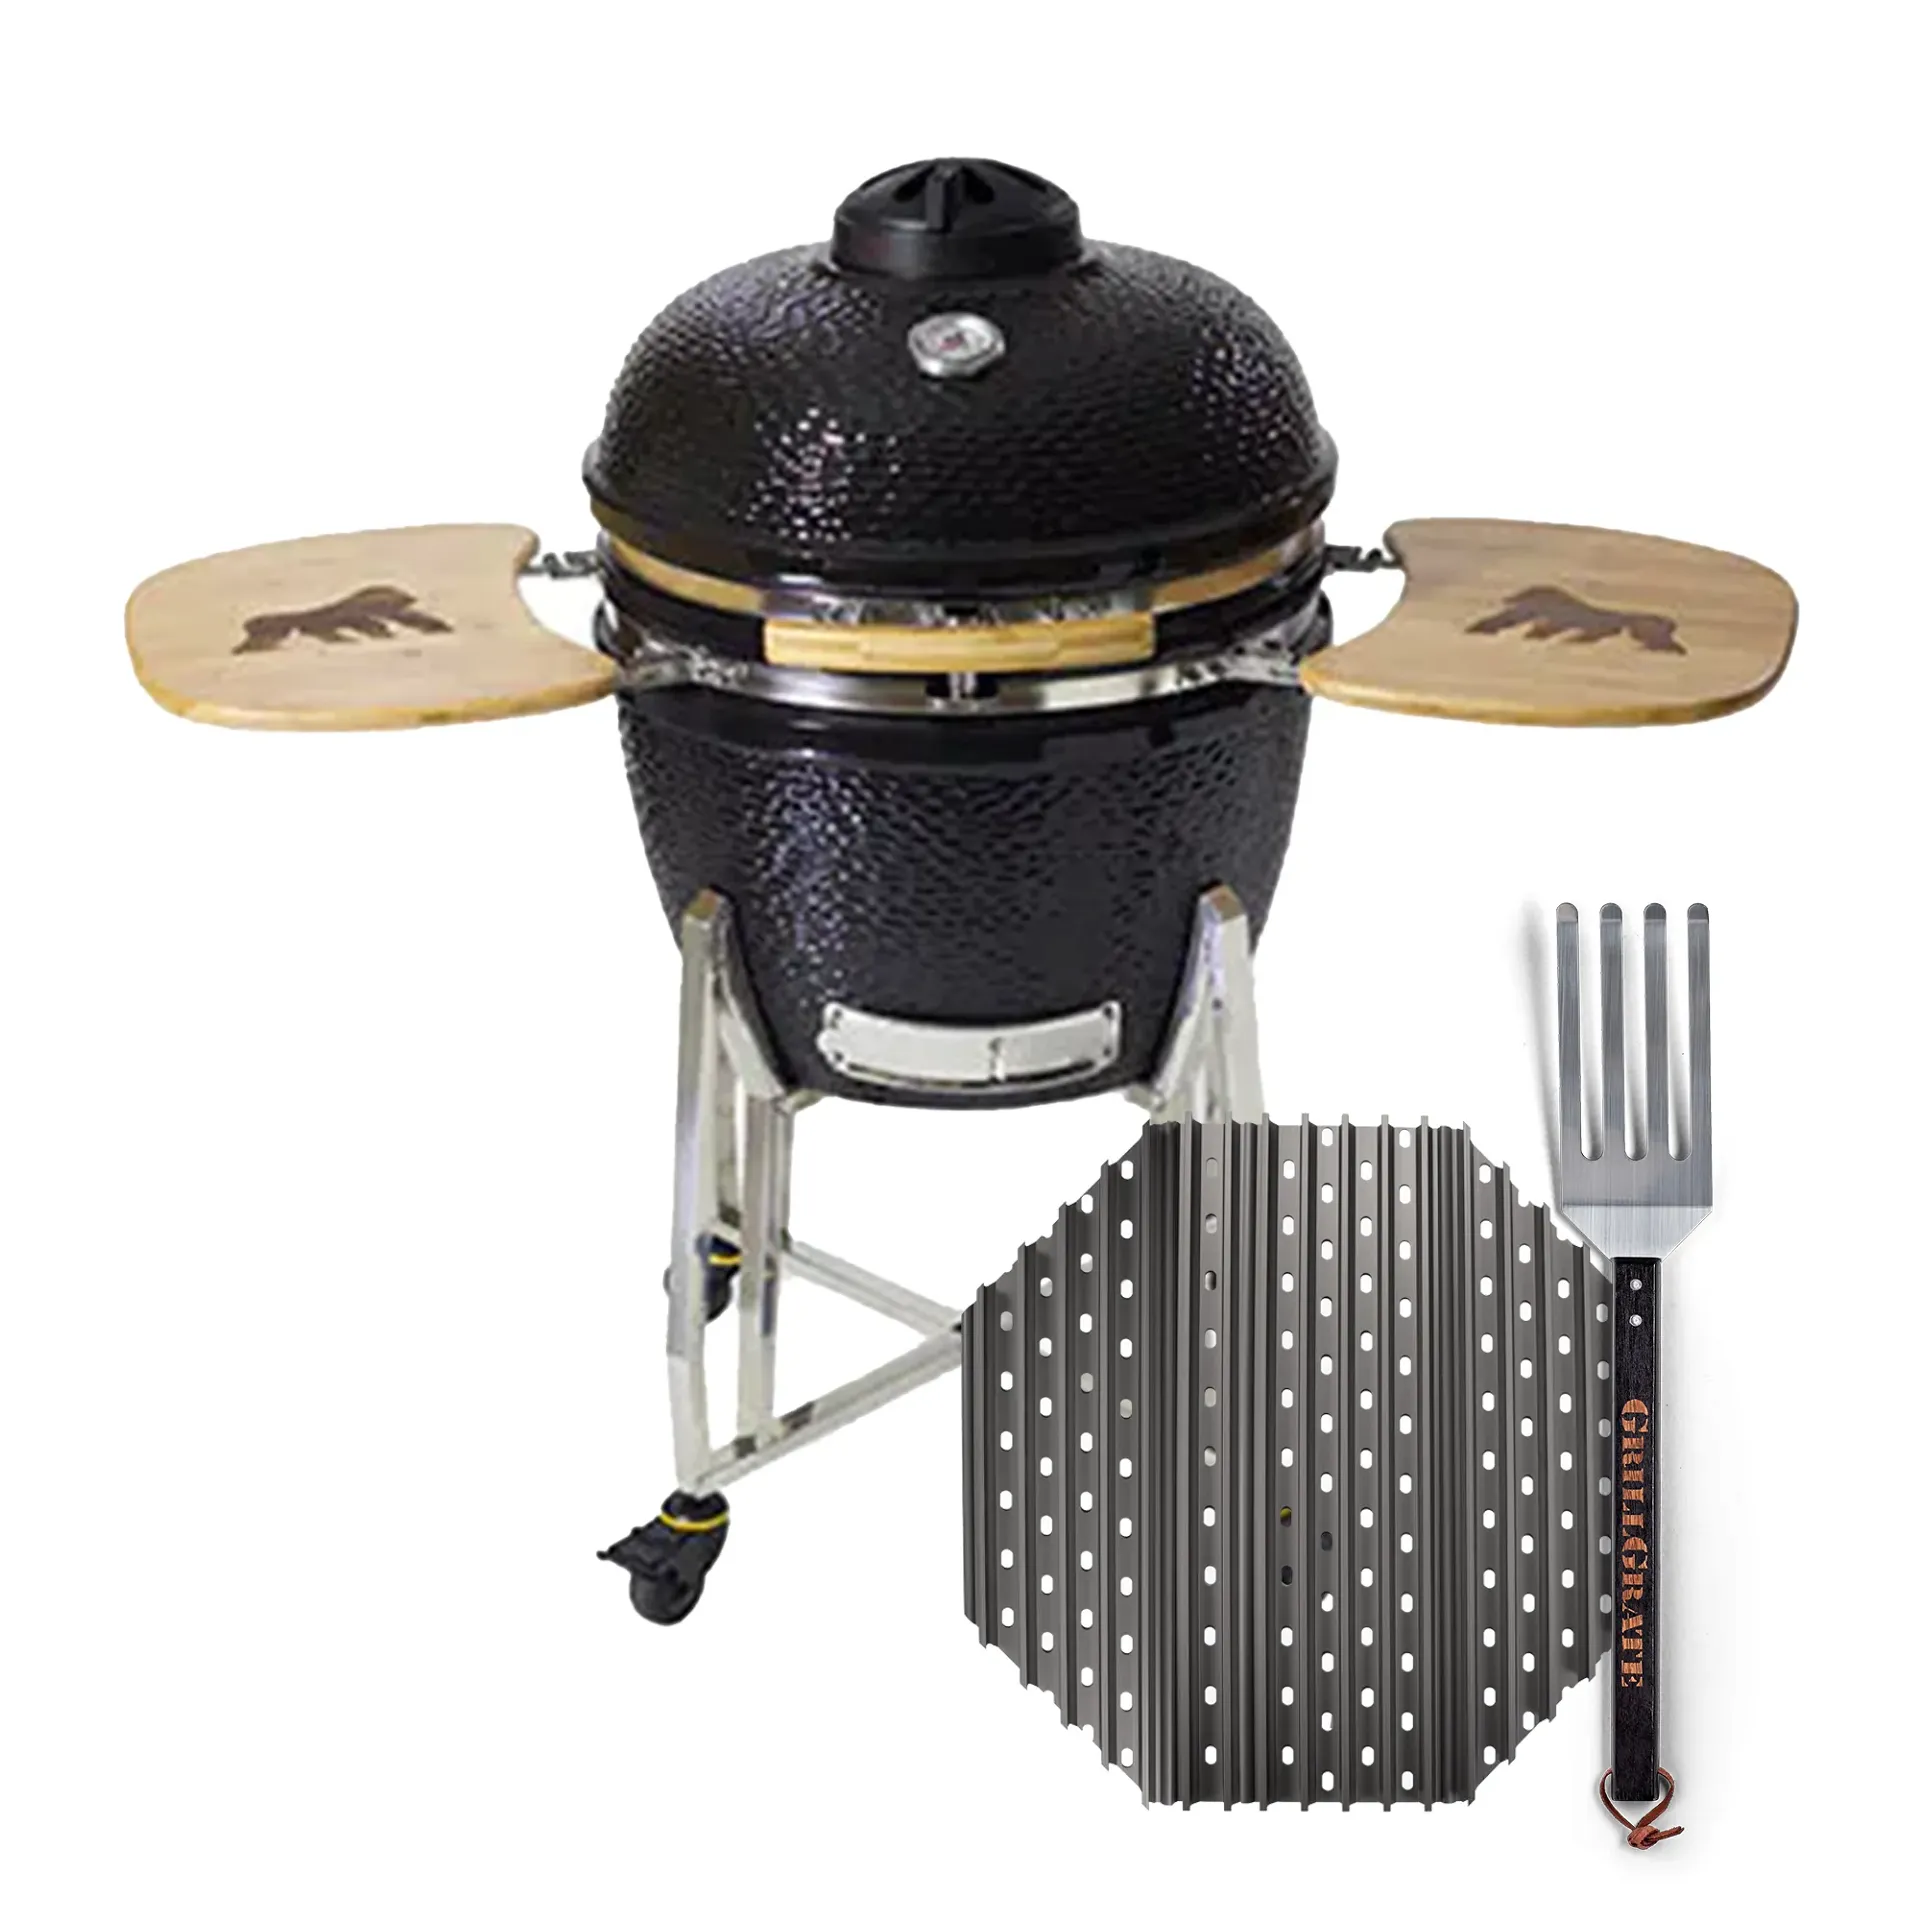 The best accessories for the Kamado Joe Grill?